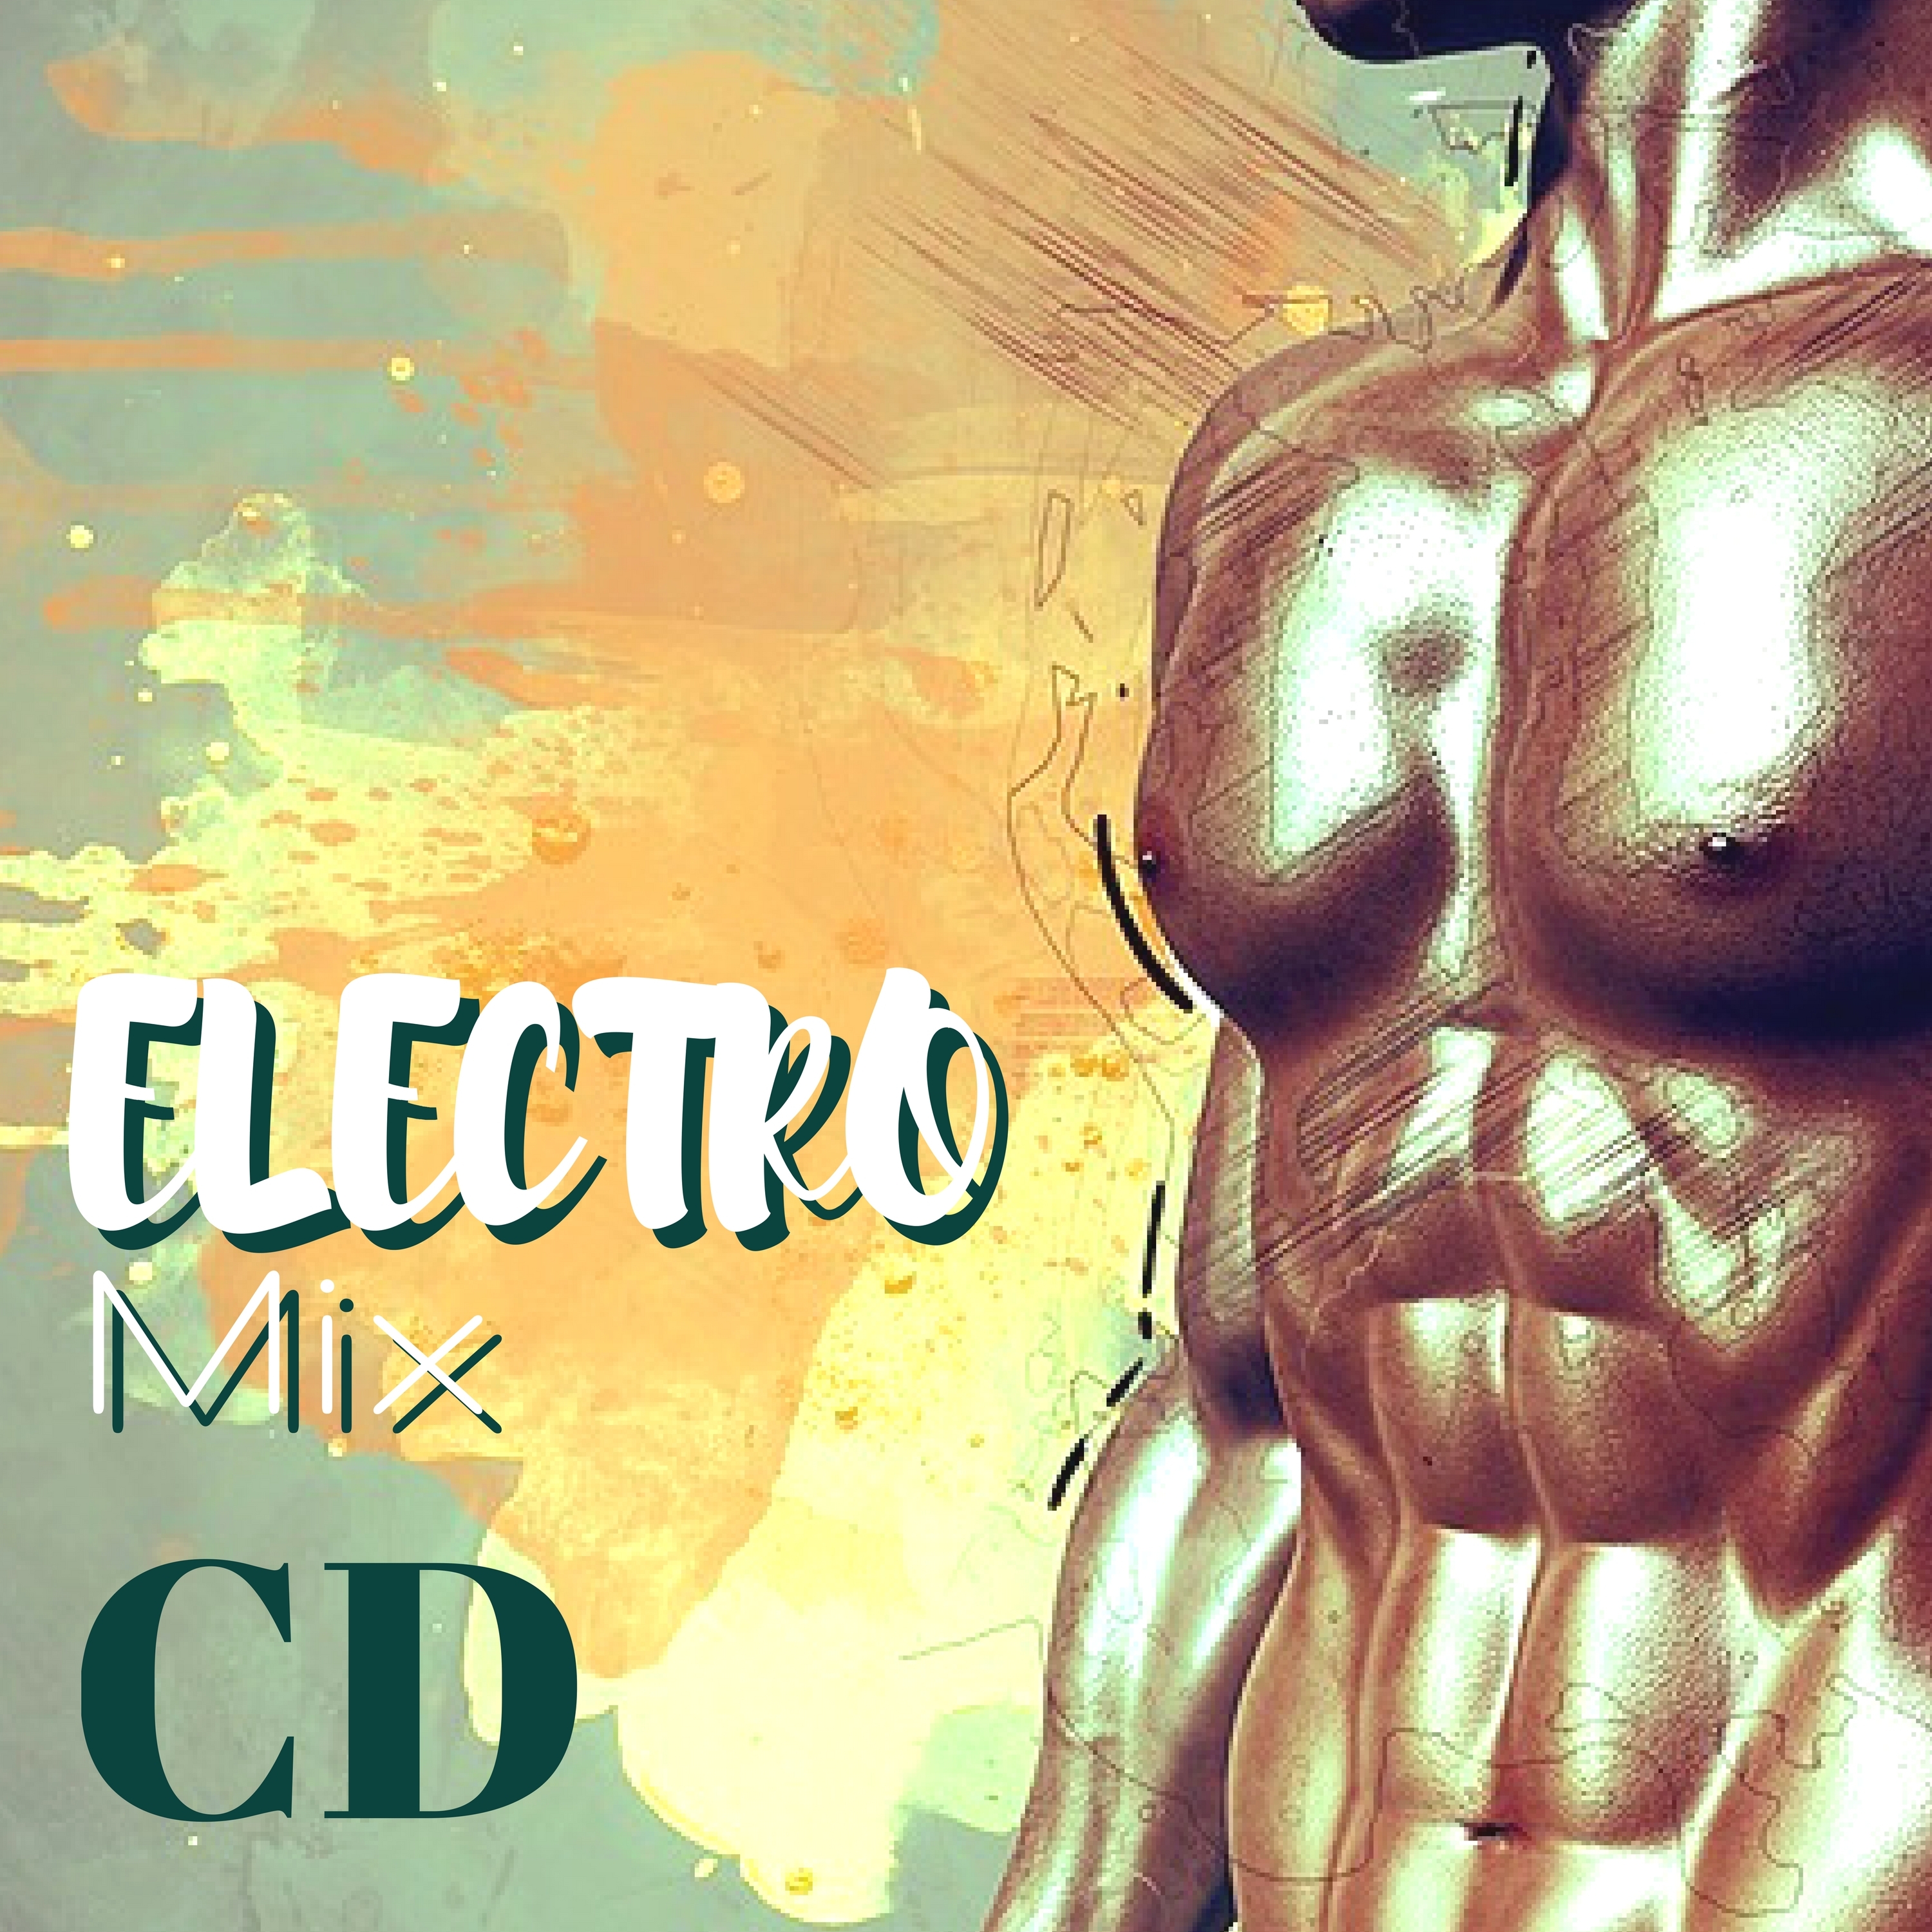 Electro Mix CD - Electronic and Dance Music Compilation 2018 for Motivating Your Daily Workout